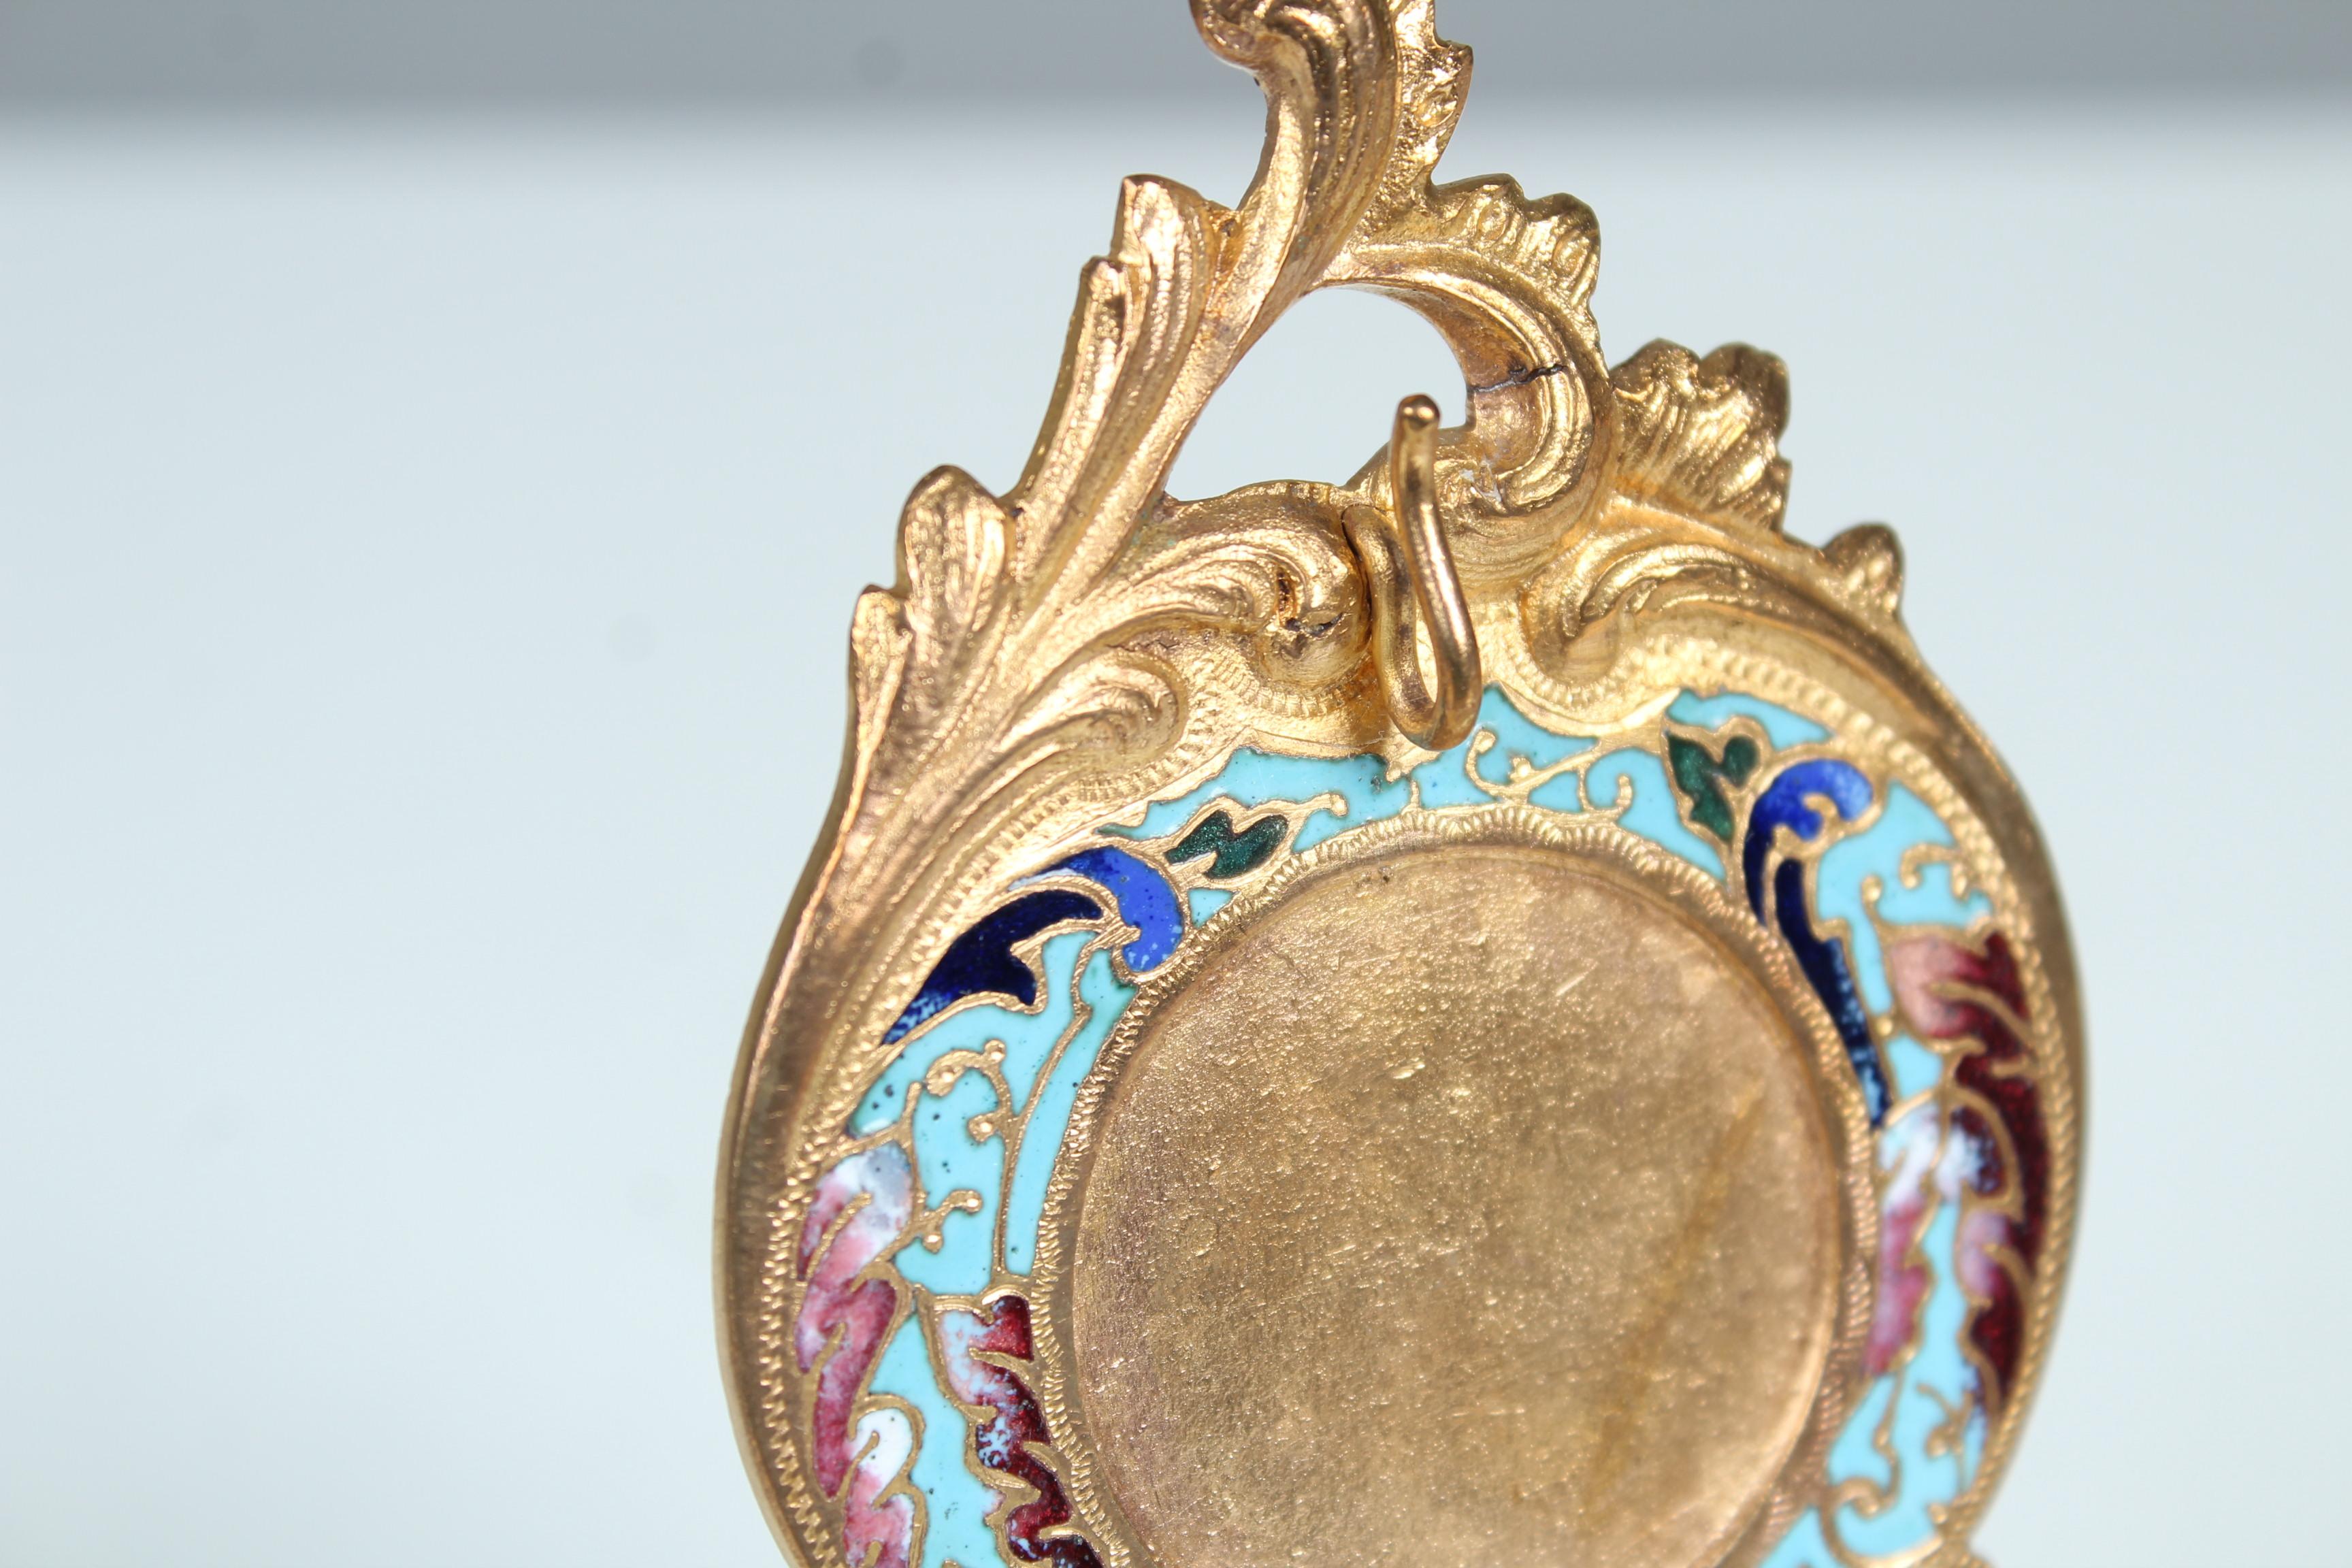 Beautiful pocket watch stand, or jewelry stand.
Brass with enameled ornaments.